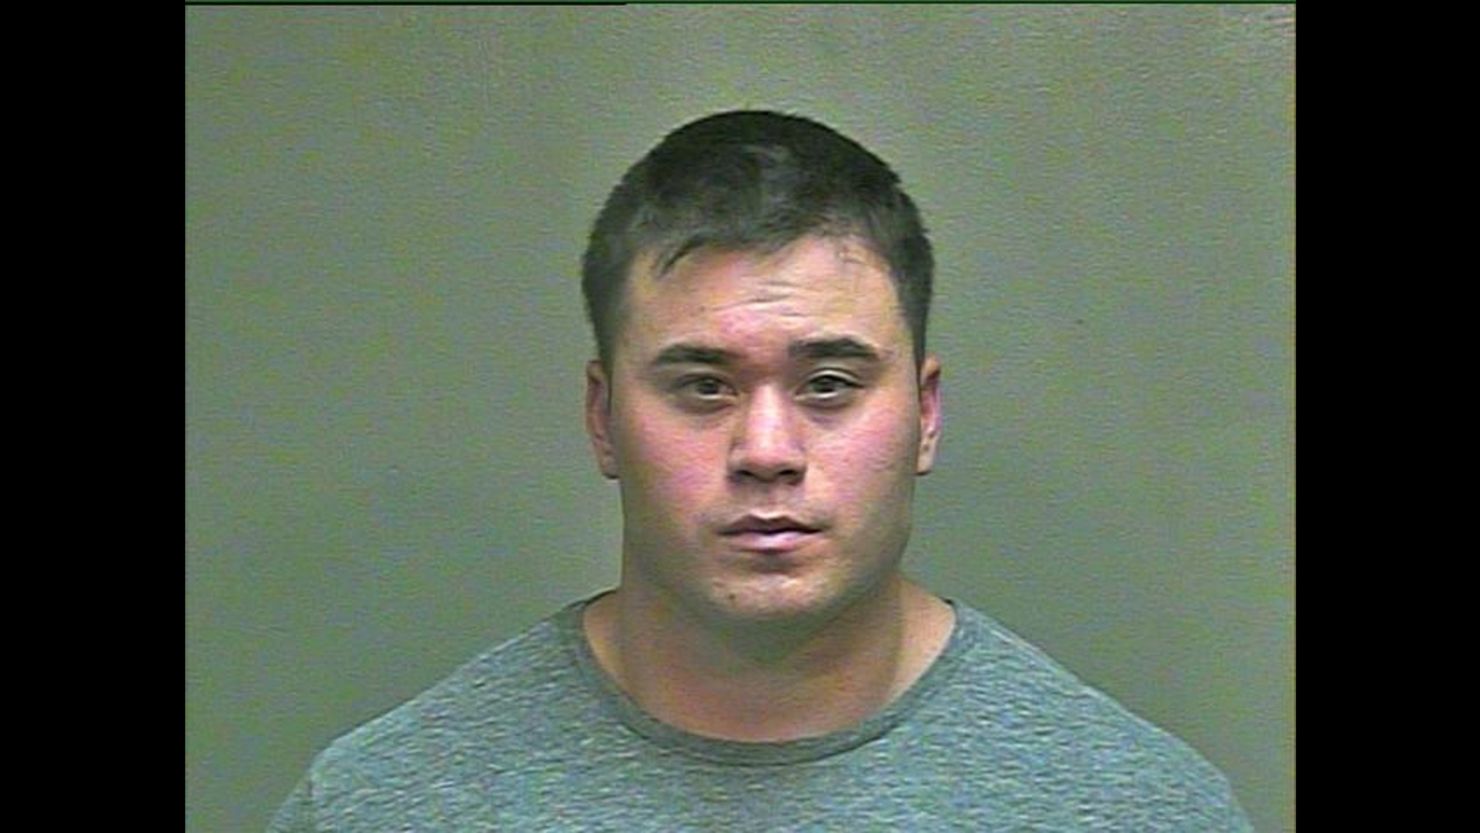 Officer Daniel Holtzclaw, 27, was arrested Thursday and faces nine charges, including three counts of forcible oral sodomy, two counts of indecent exposure, two counts of rape and two counts of sexual battery, the Oklahoma County Sheriff's Office says.